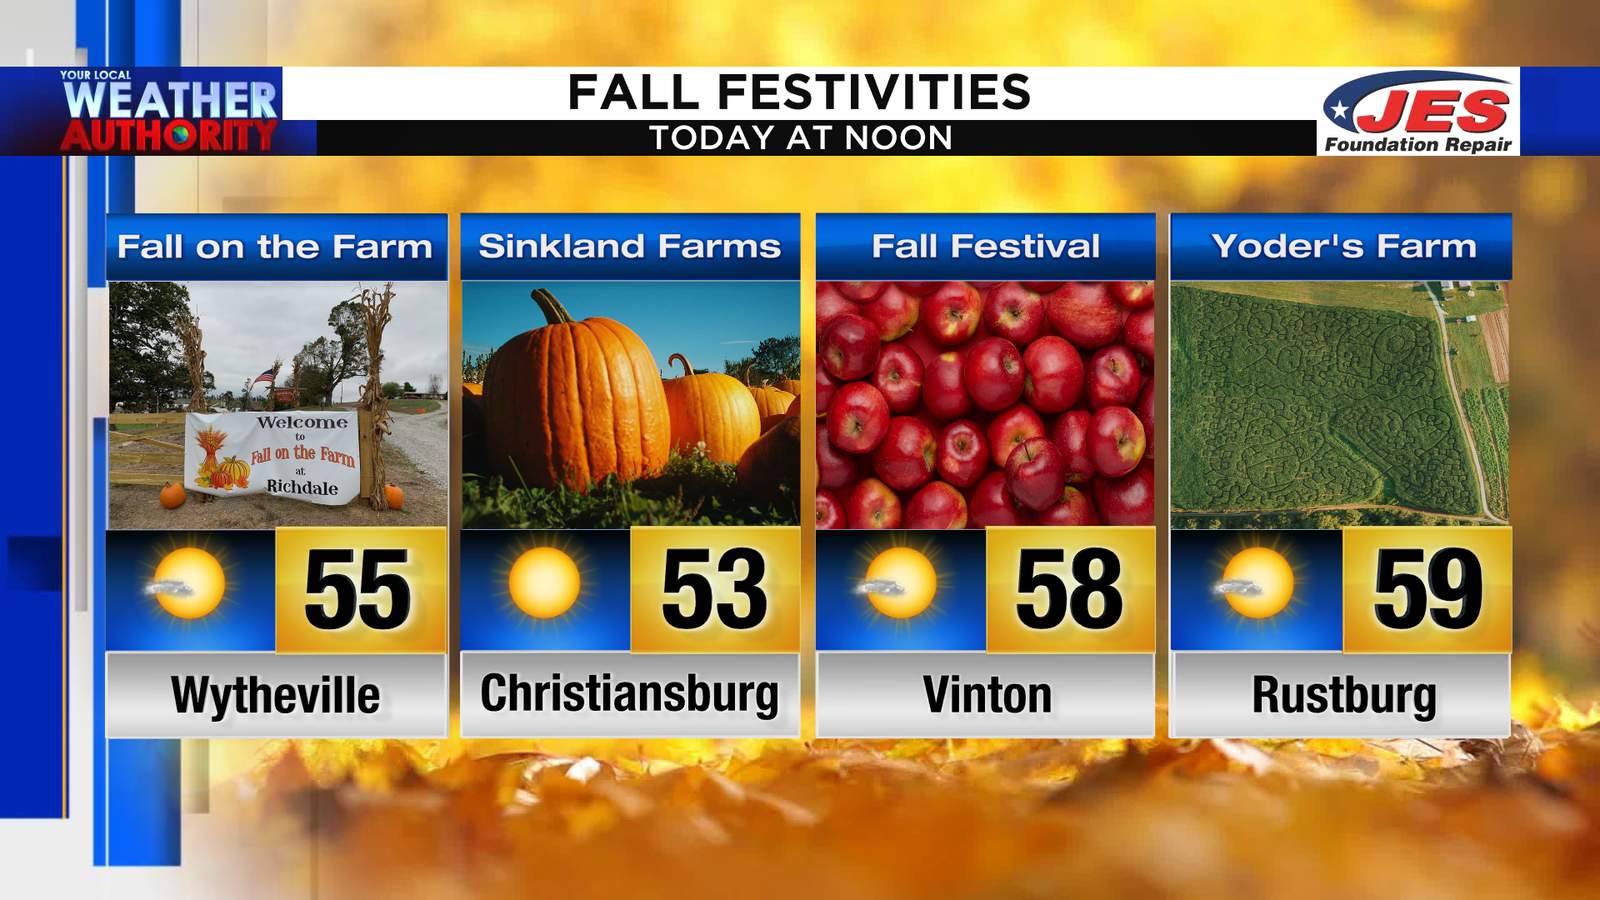 Sunny and cool weather reigns as you enjoy fall festivities this weekend!